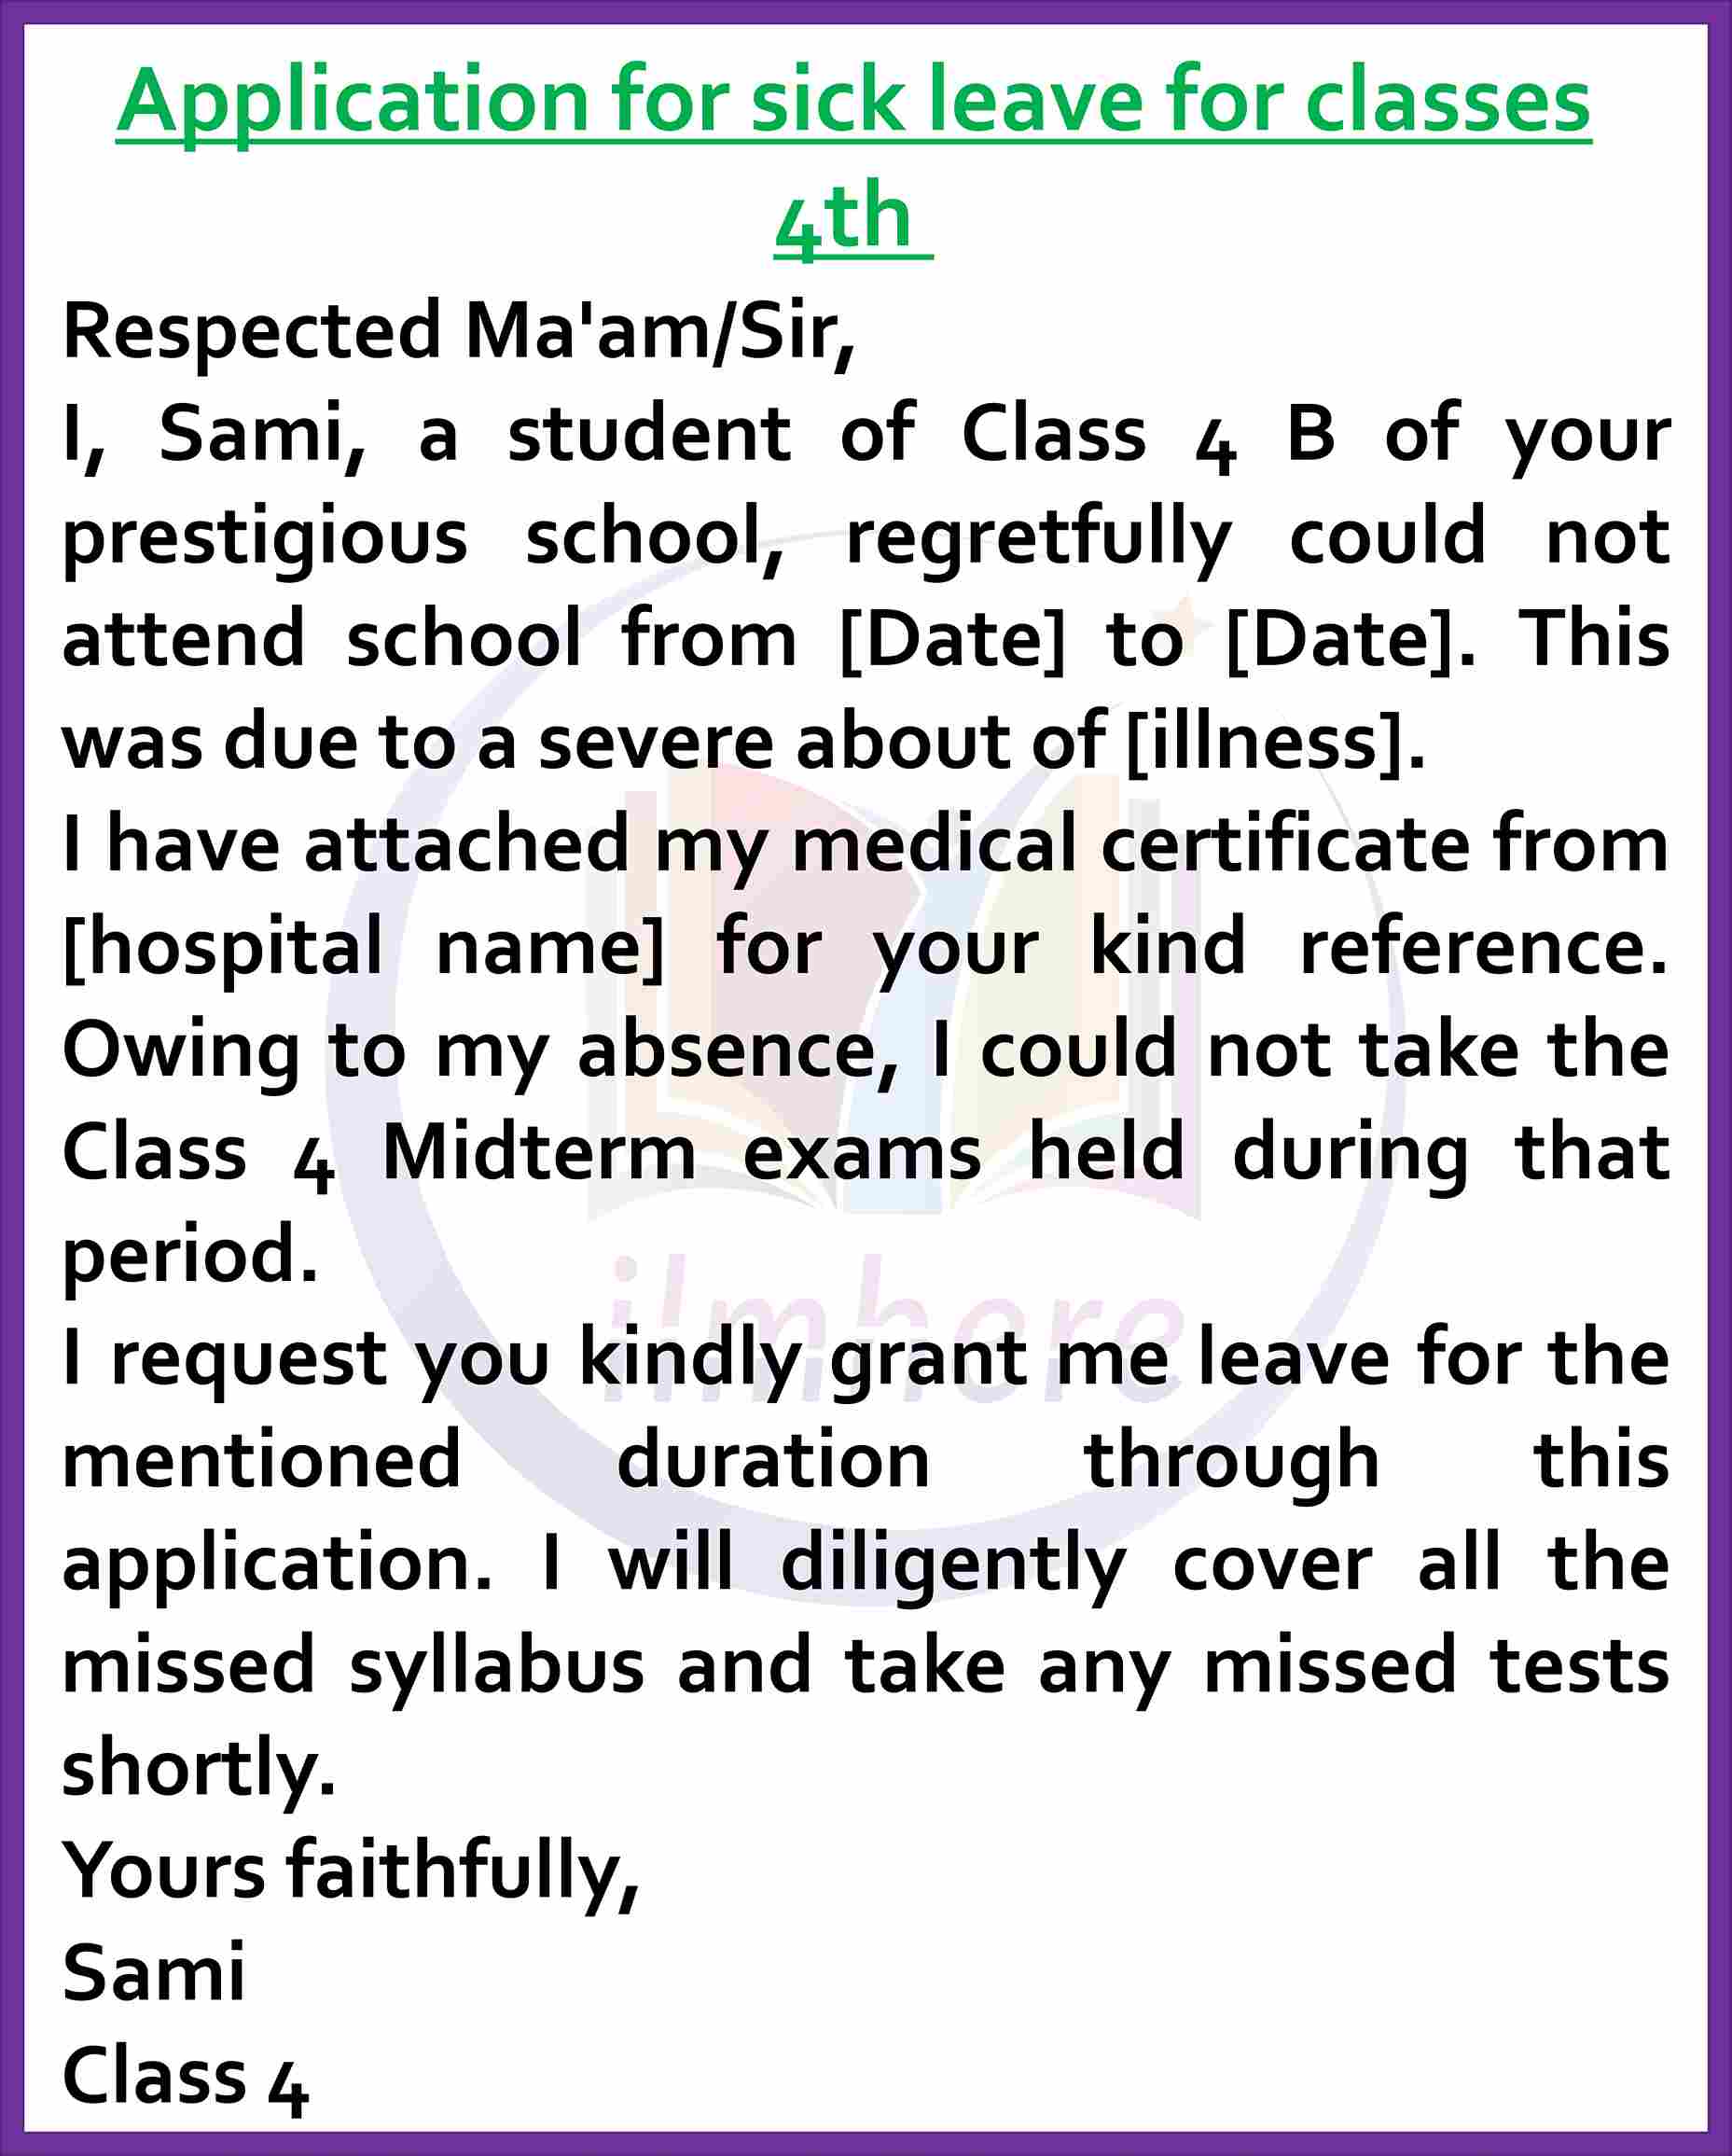 Sick leave application for class 4th